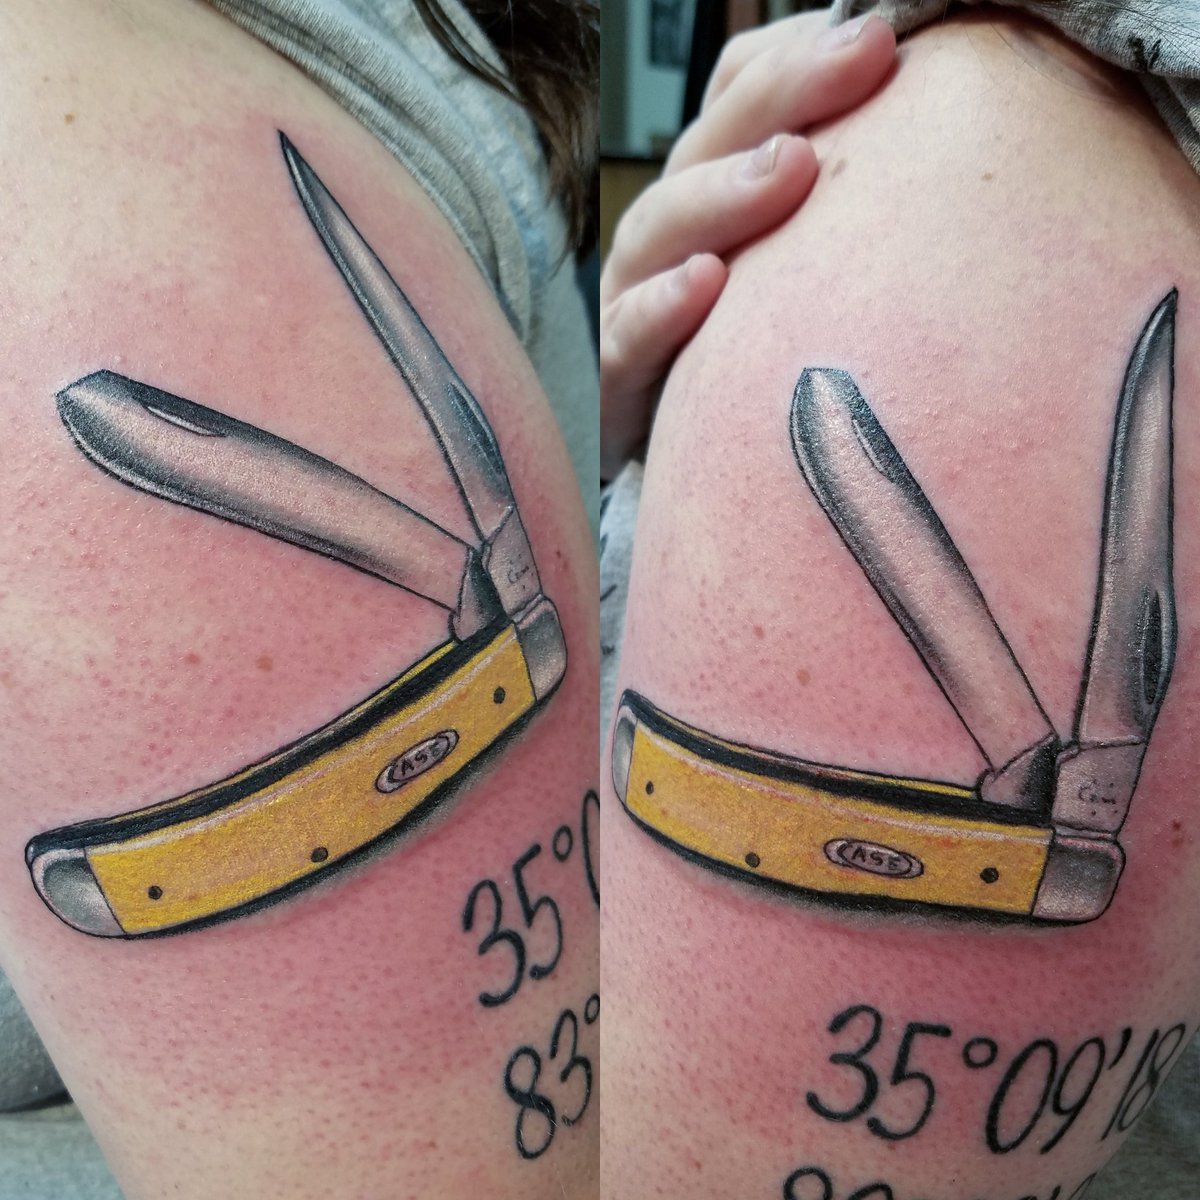 Knives - Tattoos Designs by probably-not-diego on DeviantArt